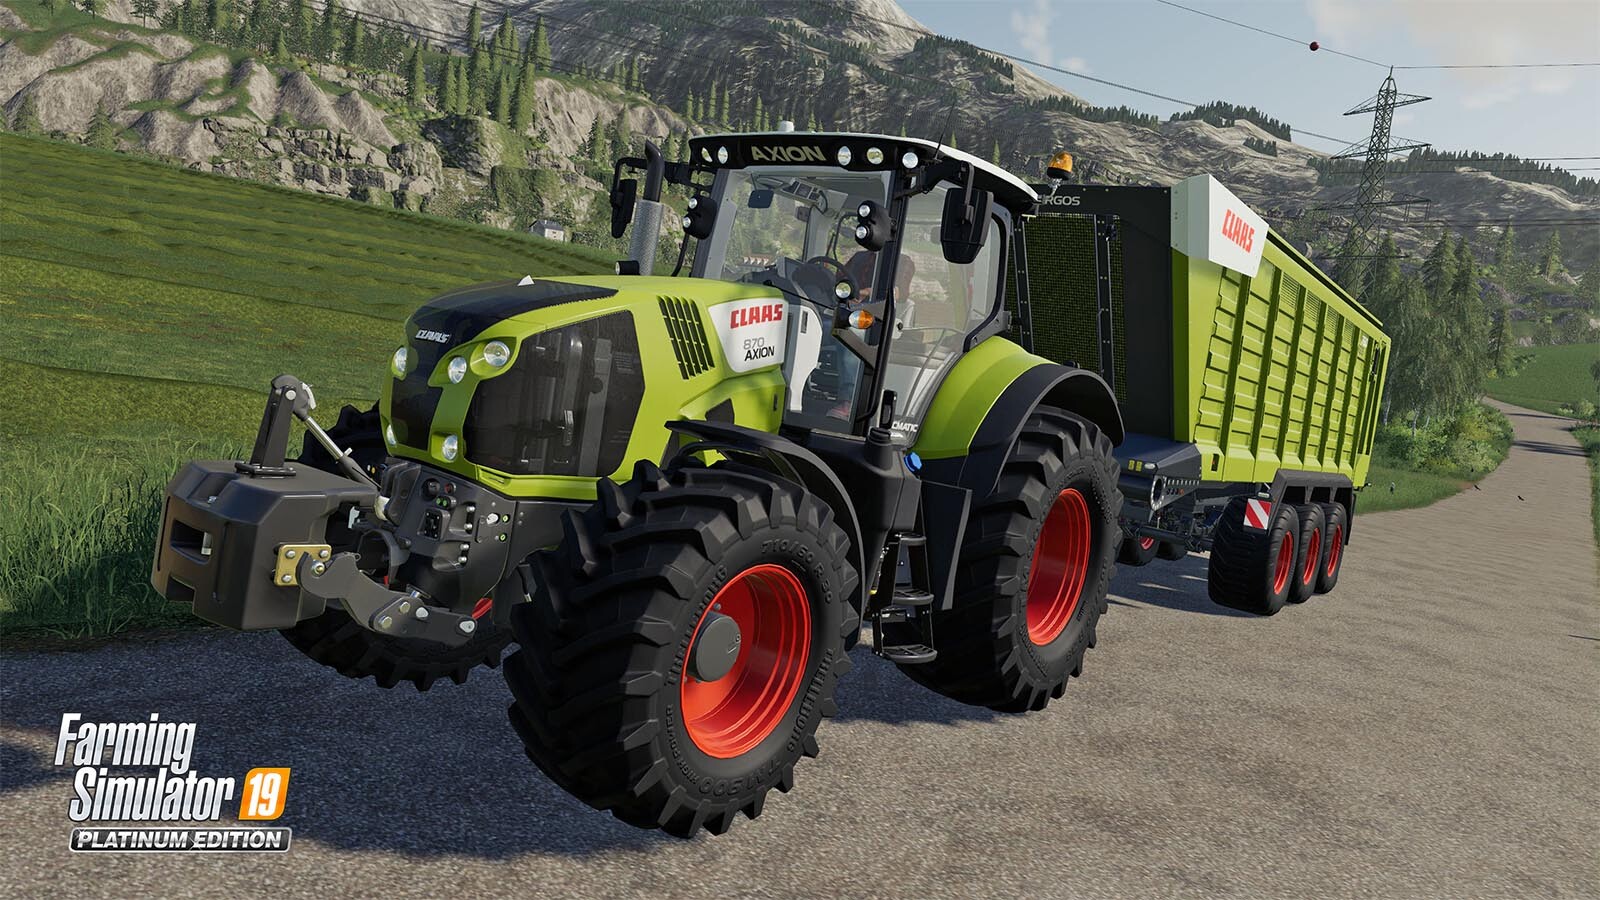 Farming Simulator 19 Free Download in Highly Compressed